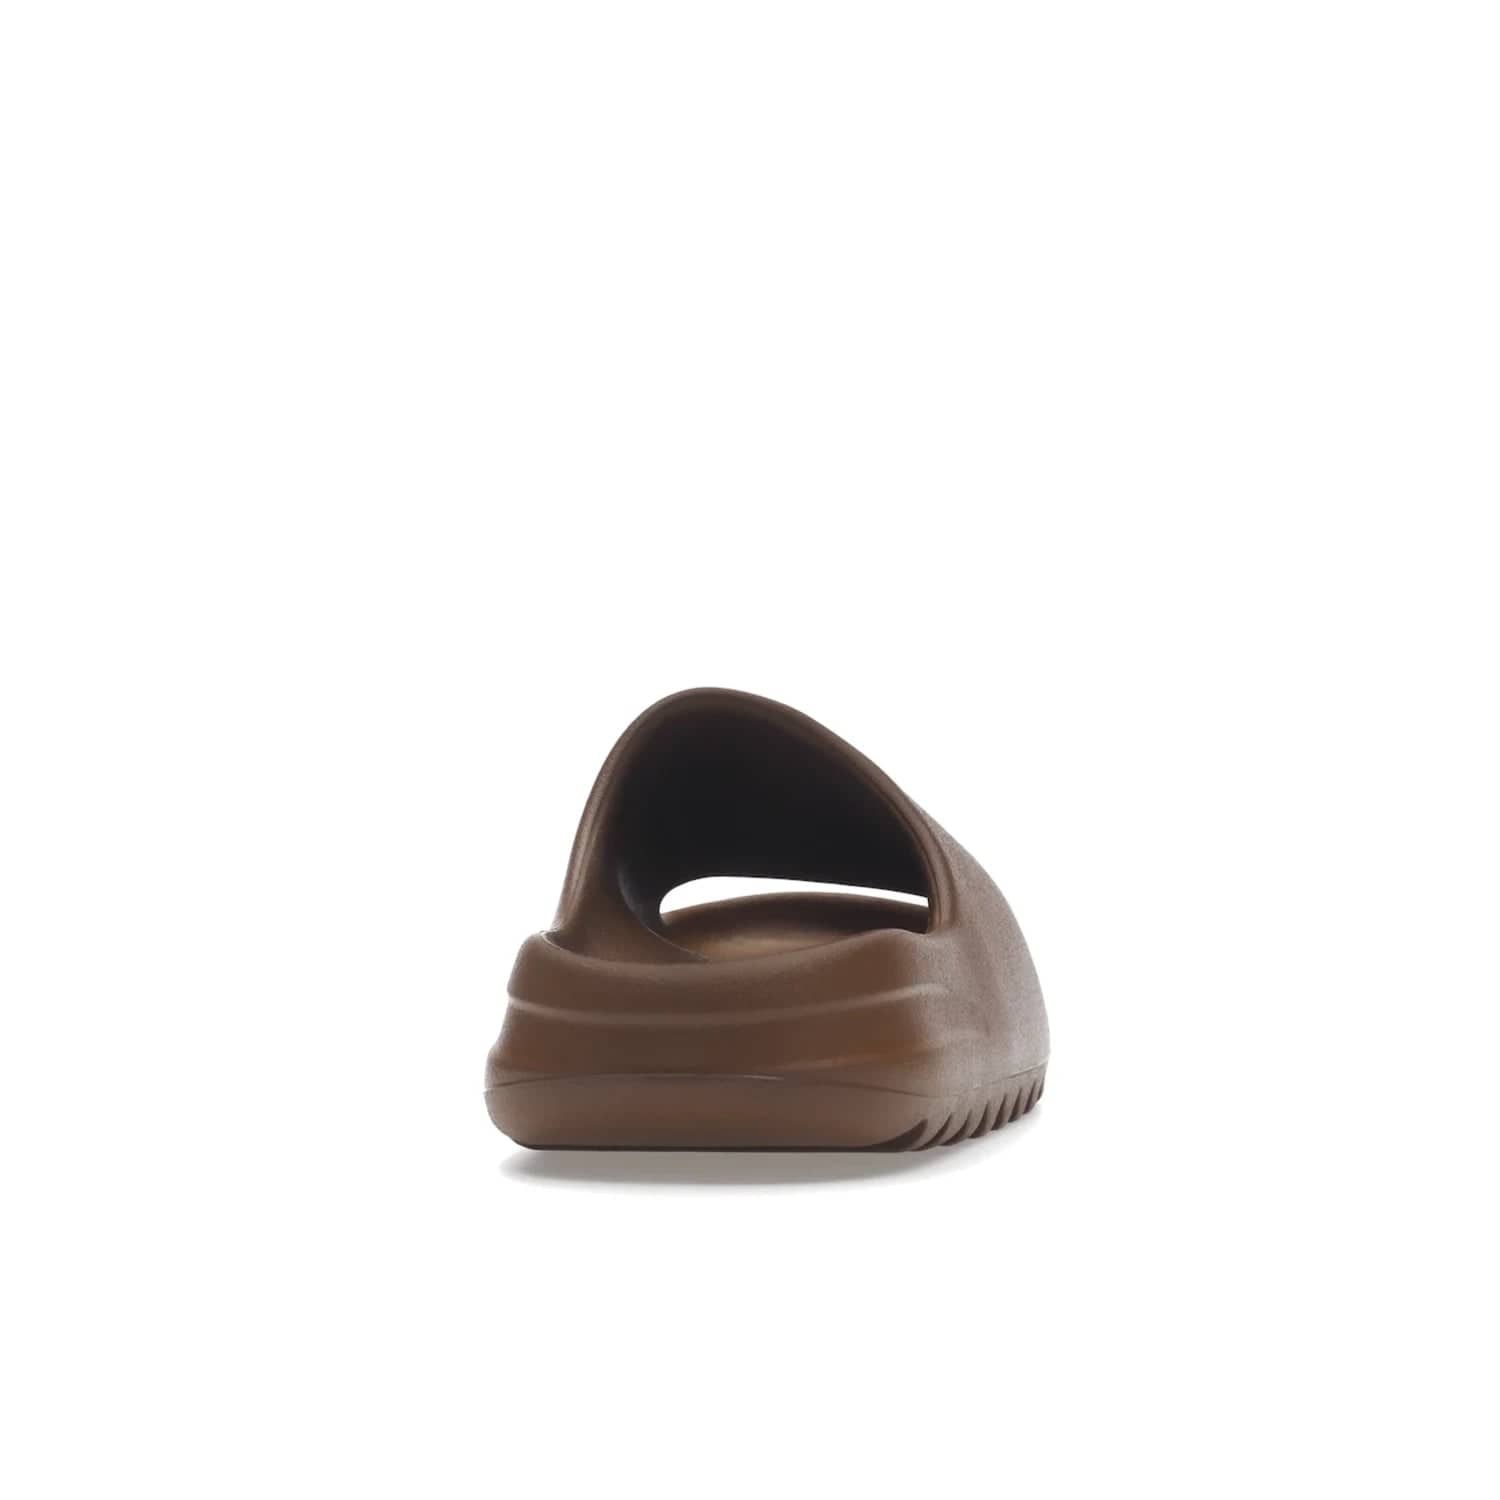 adidas Yeezy Slide Flax - Image 29 - Only at www.BallersClubKickz.com - Score the perfect casual look with the adidas Yeezy Slide Flax. Made with lightweight injected EVA plus horizontal grooves underfoot for traction. Release on August 22, 2022. $70.